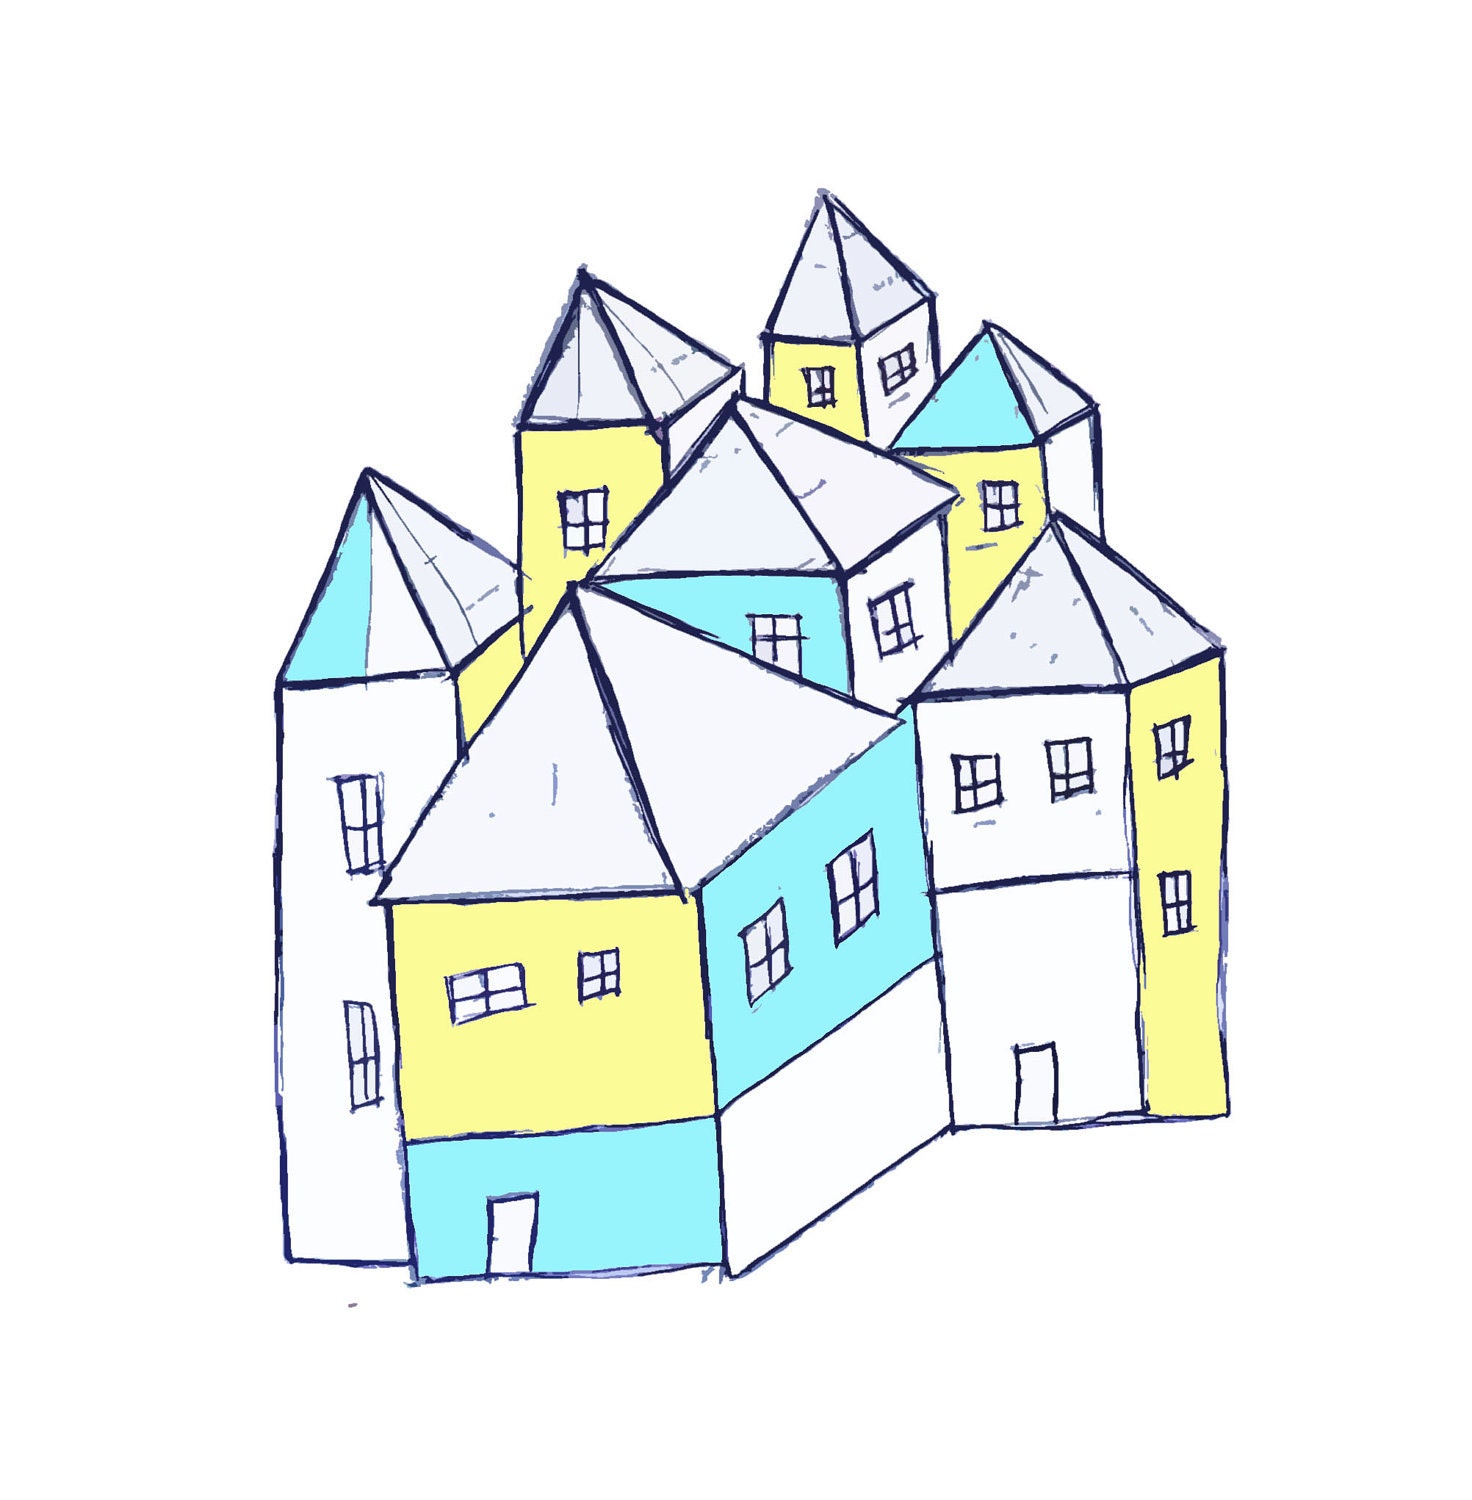 Small houses  - Limited edition print  - Art print - Free shipping - 99heads